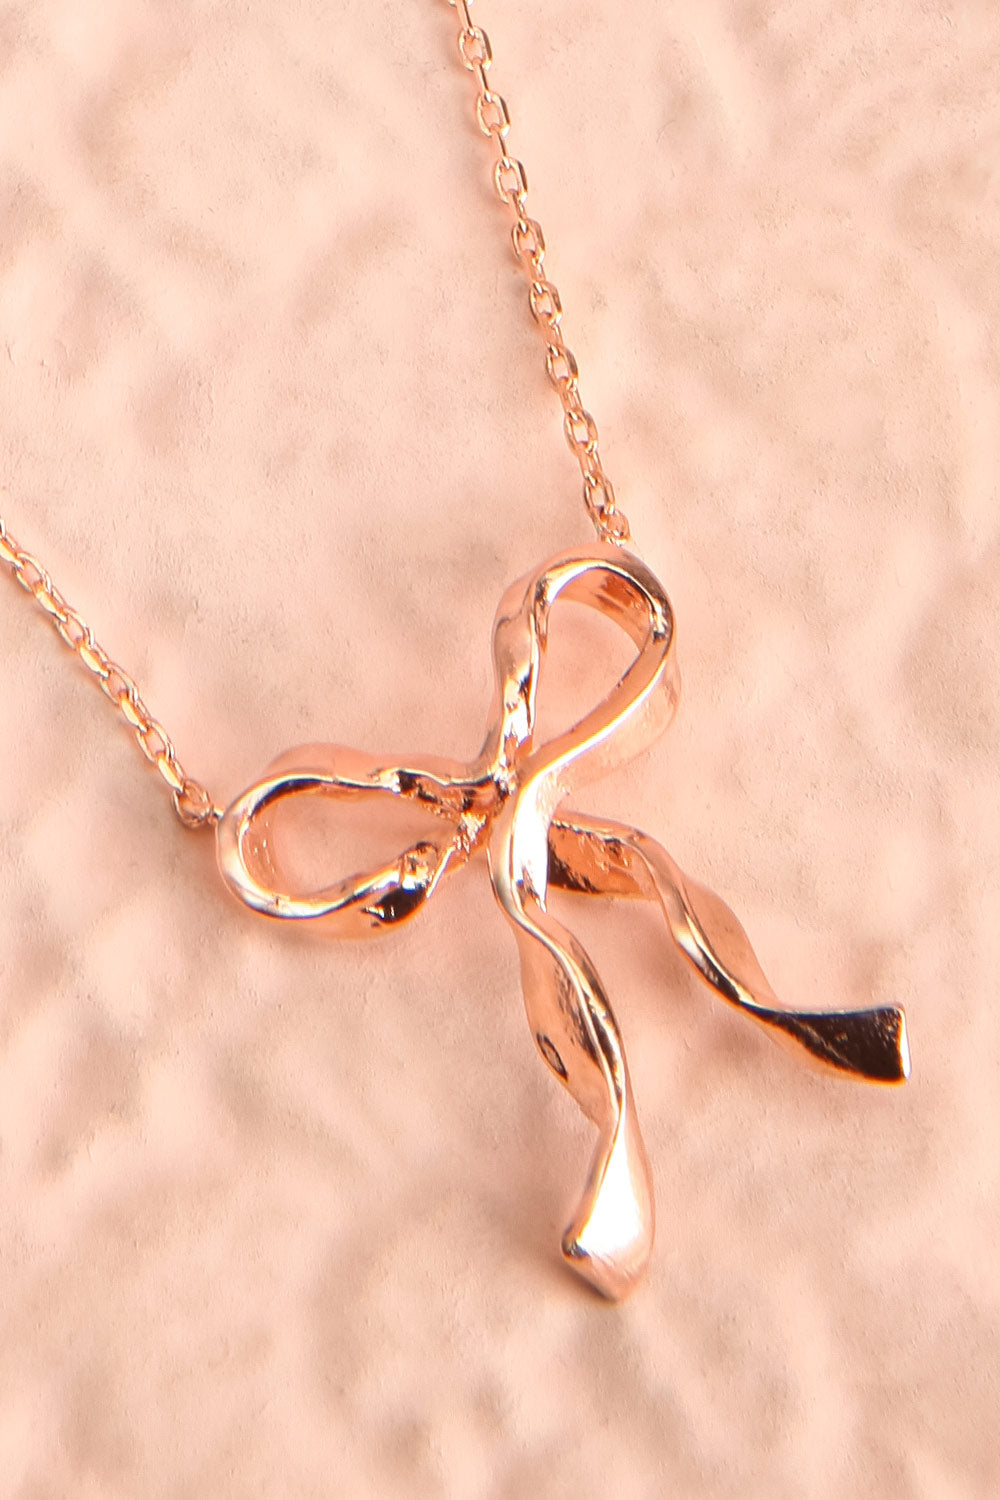 Triteia Rosegold Necklace w/ Bow Charm | Boutique 1861 flat close-up